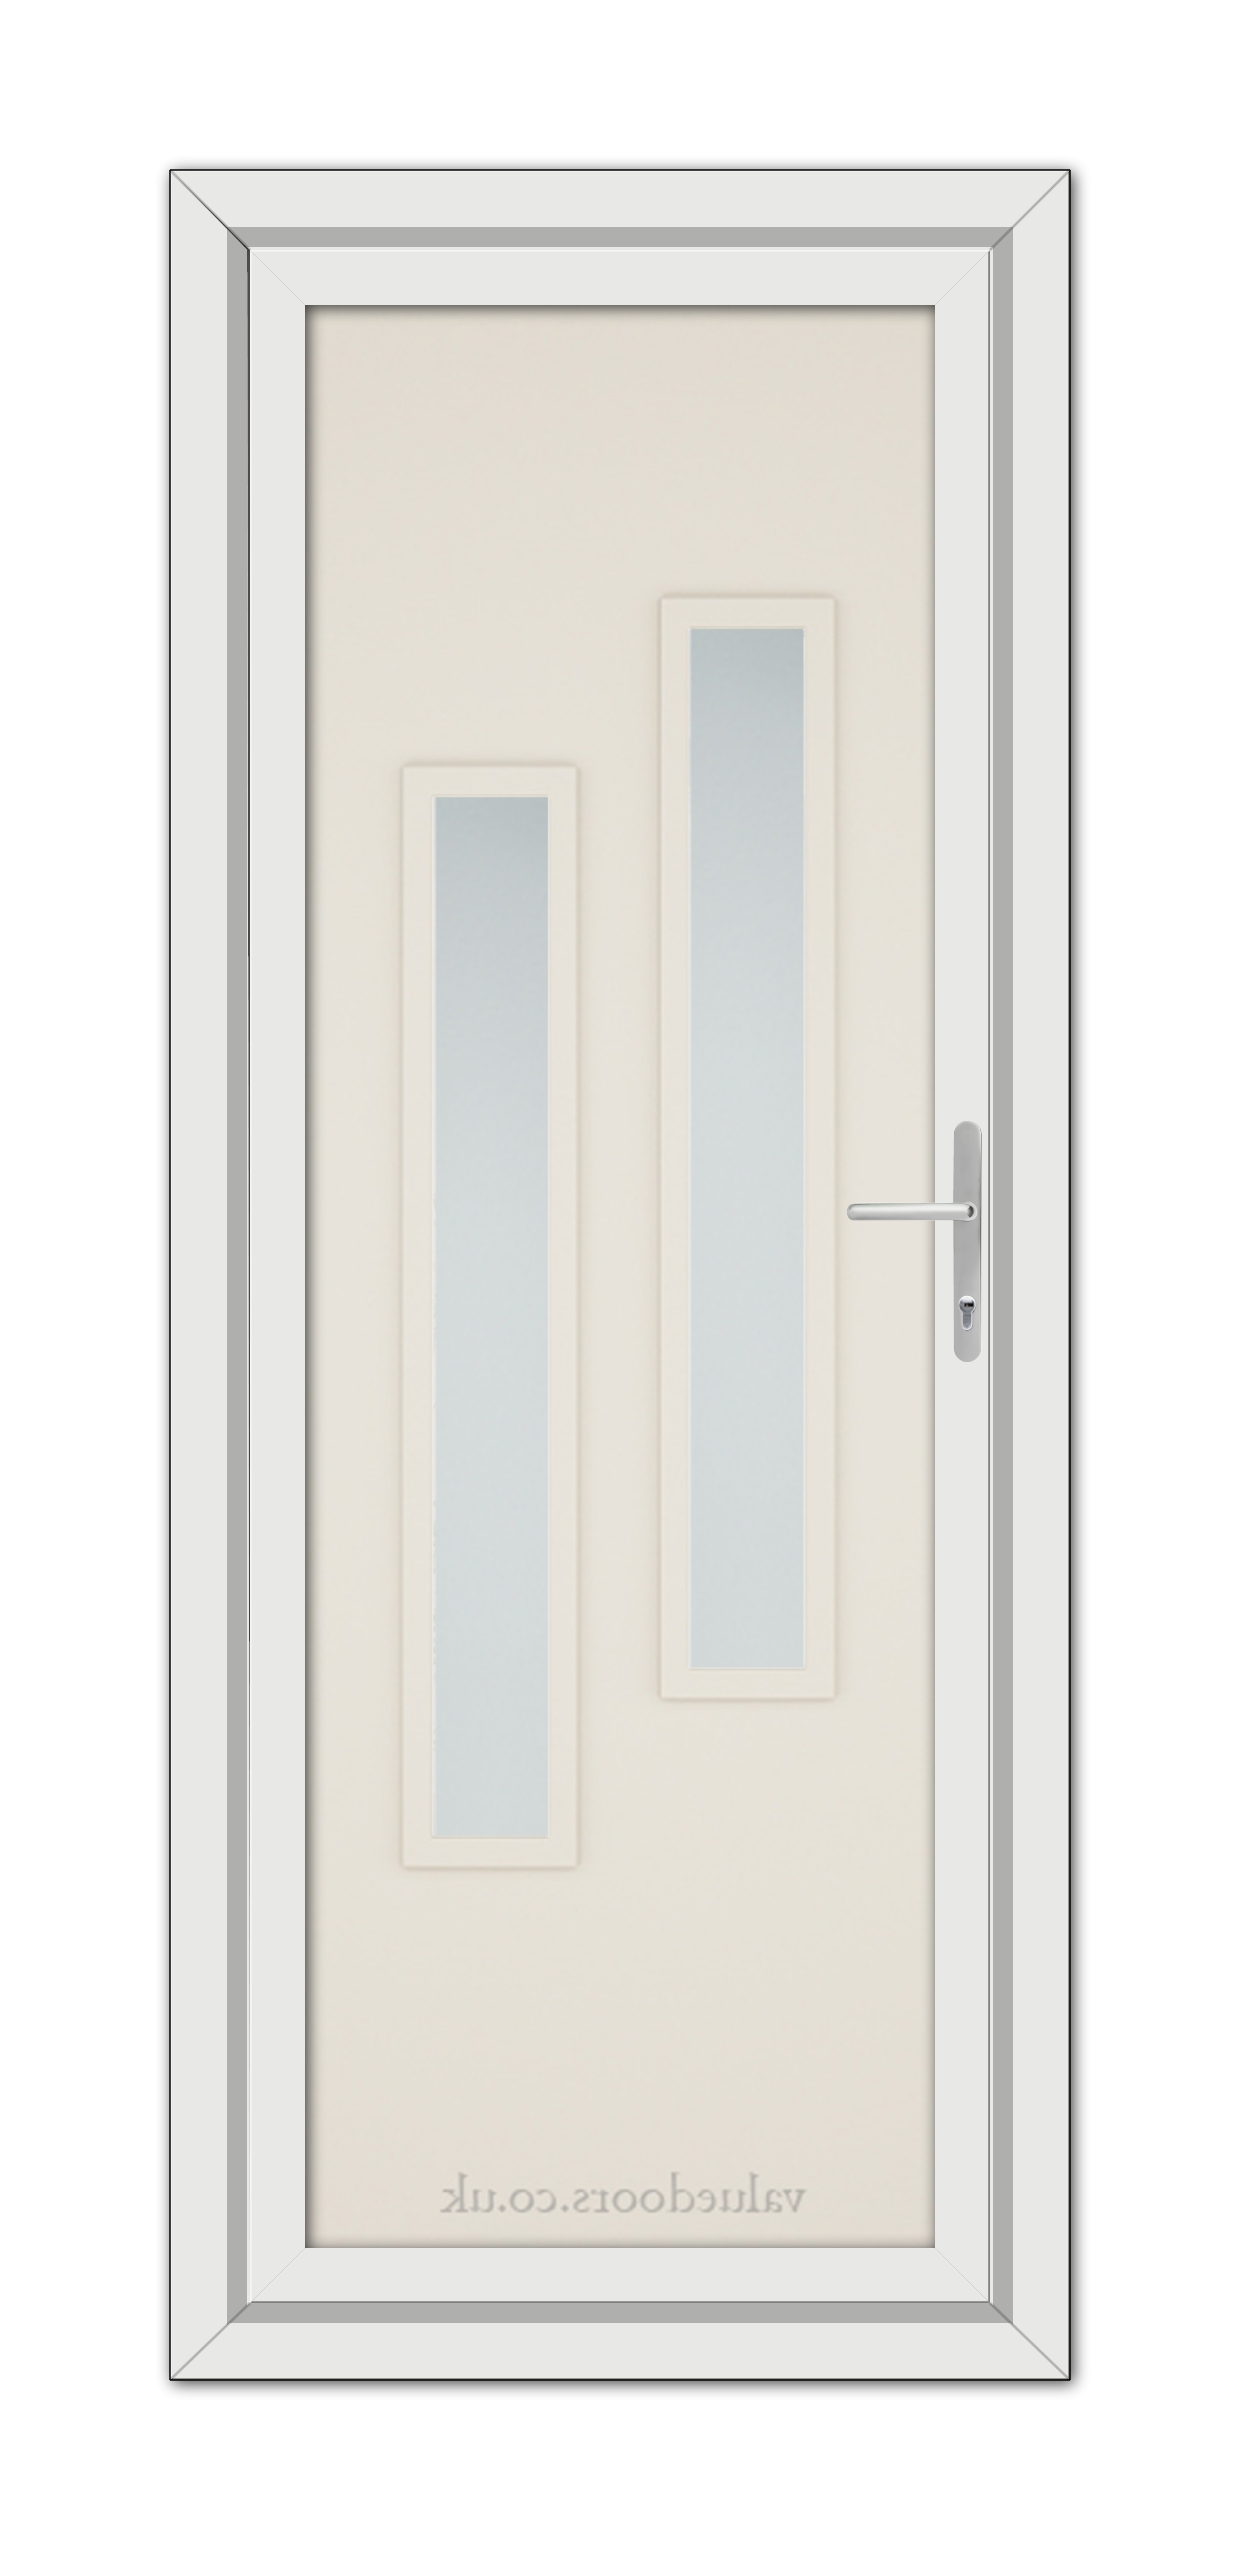 A Cream Modern 5082 uPVC door with a vertical handle and two narrow frosted glass panels, isolated on a white background.